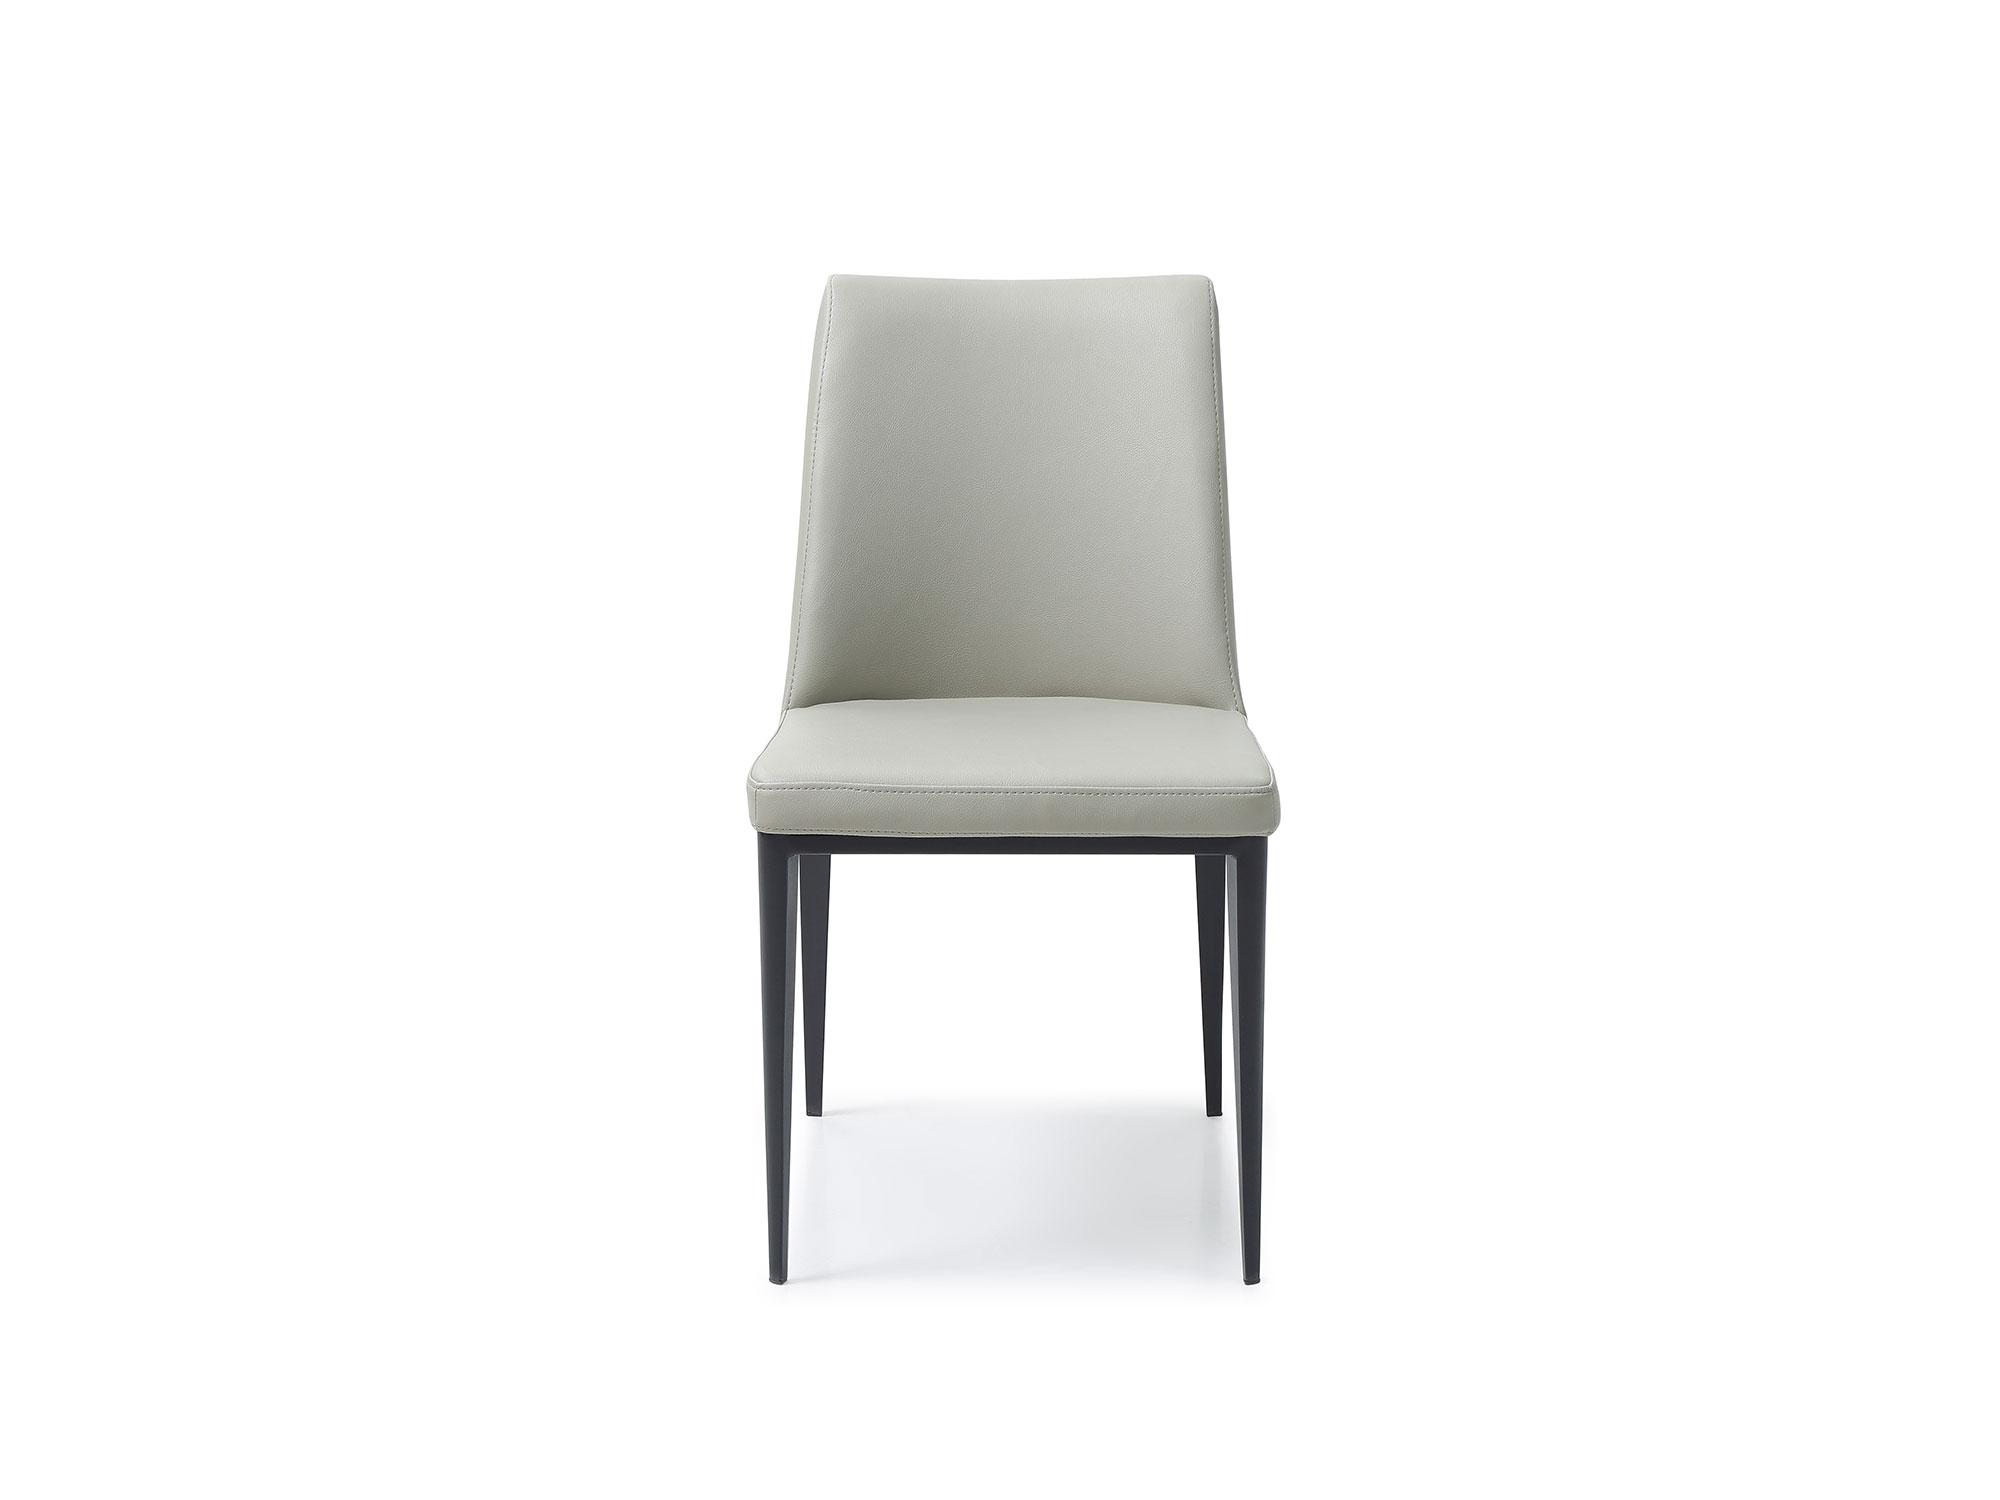 Modern Dining Chair Set DC1478-LGRY Carrie DC1478-LGRY in Light Gray Faux Leather